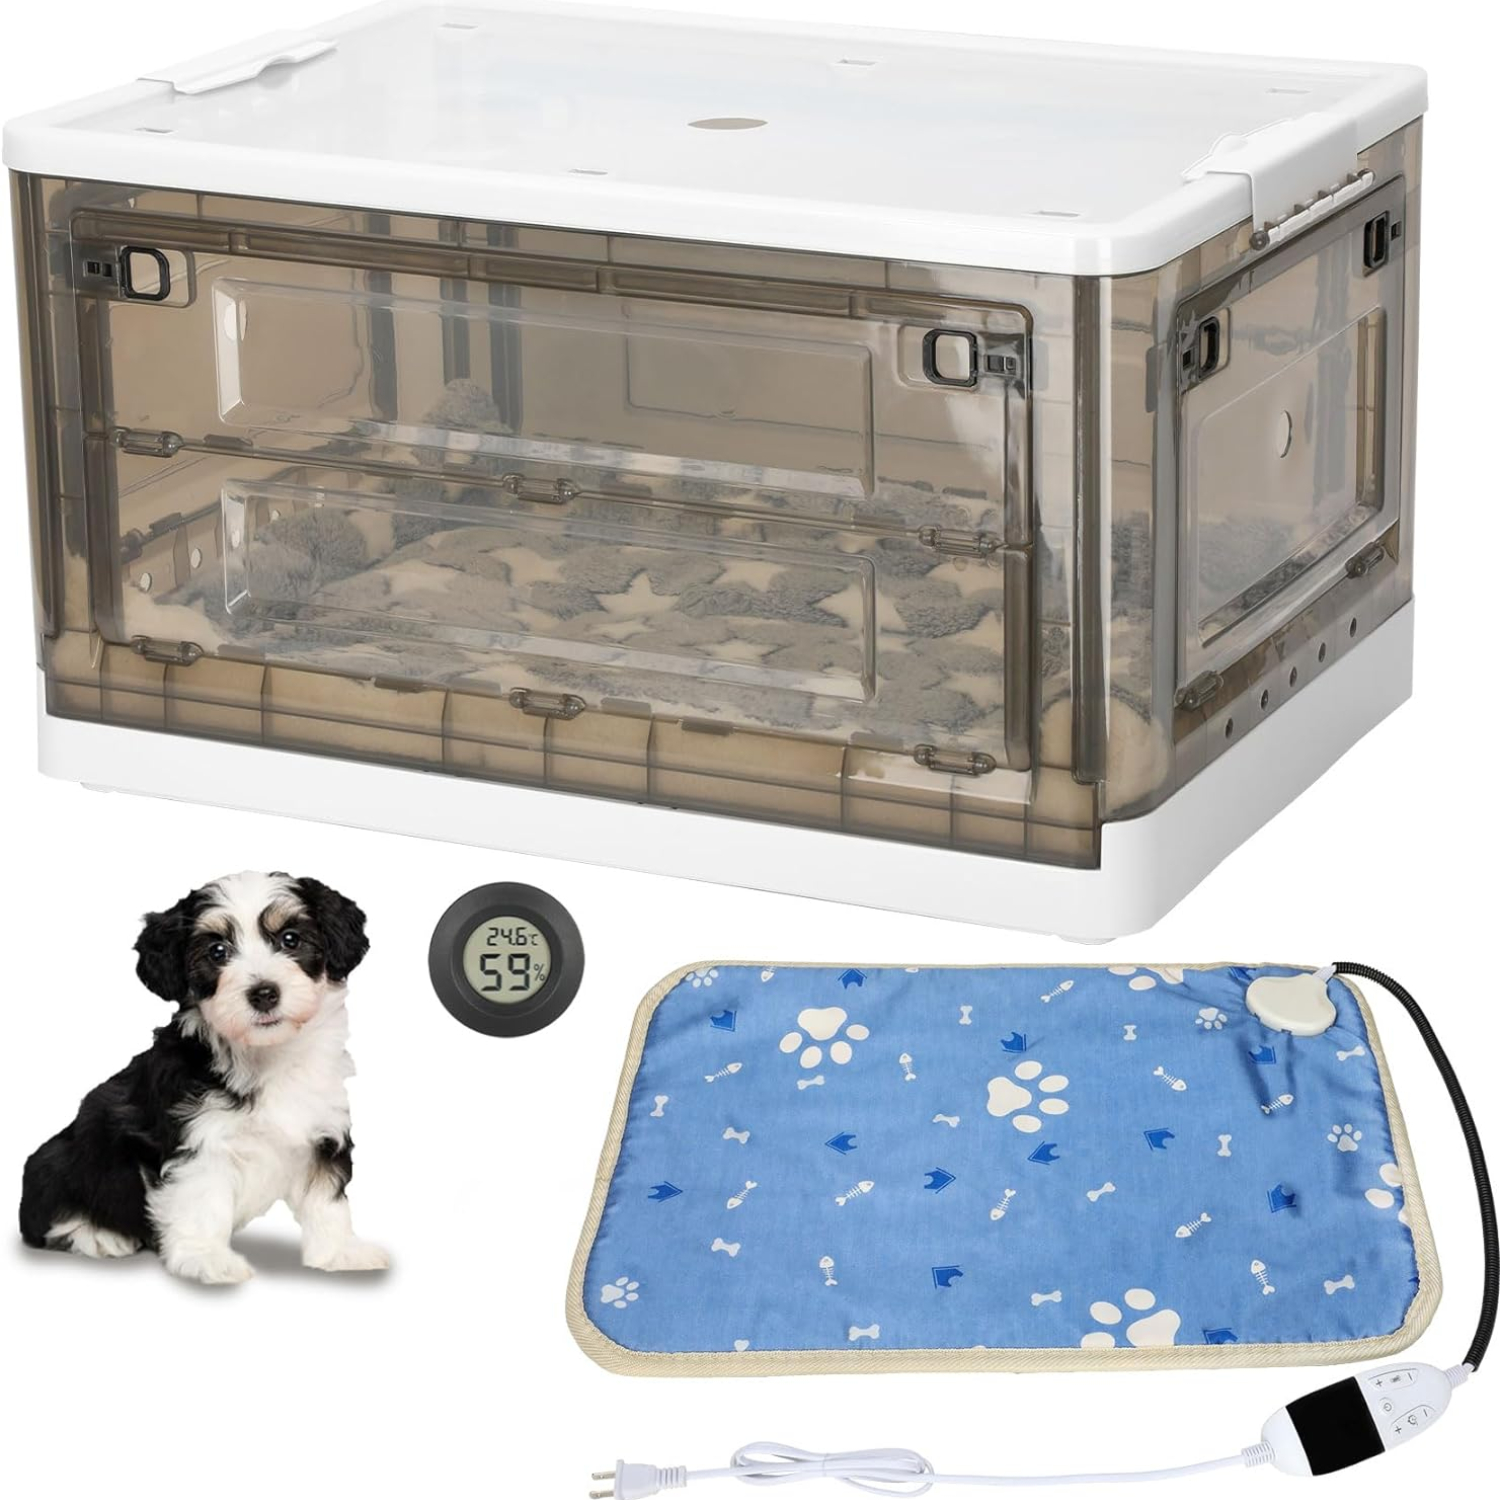 85L Puppy Incubator With Heating and Ventilation